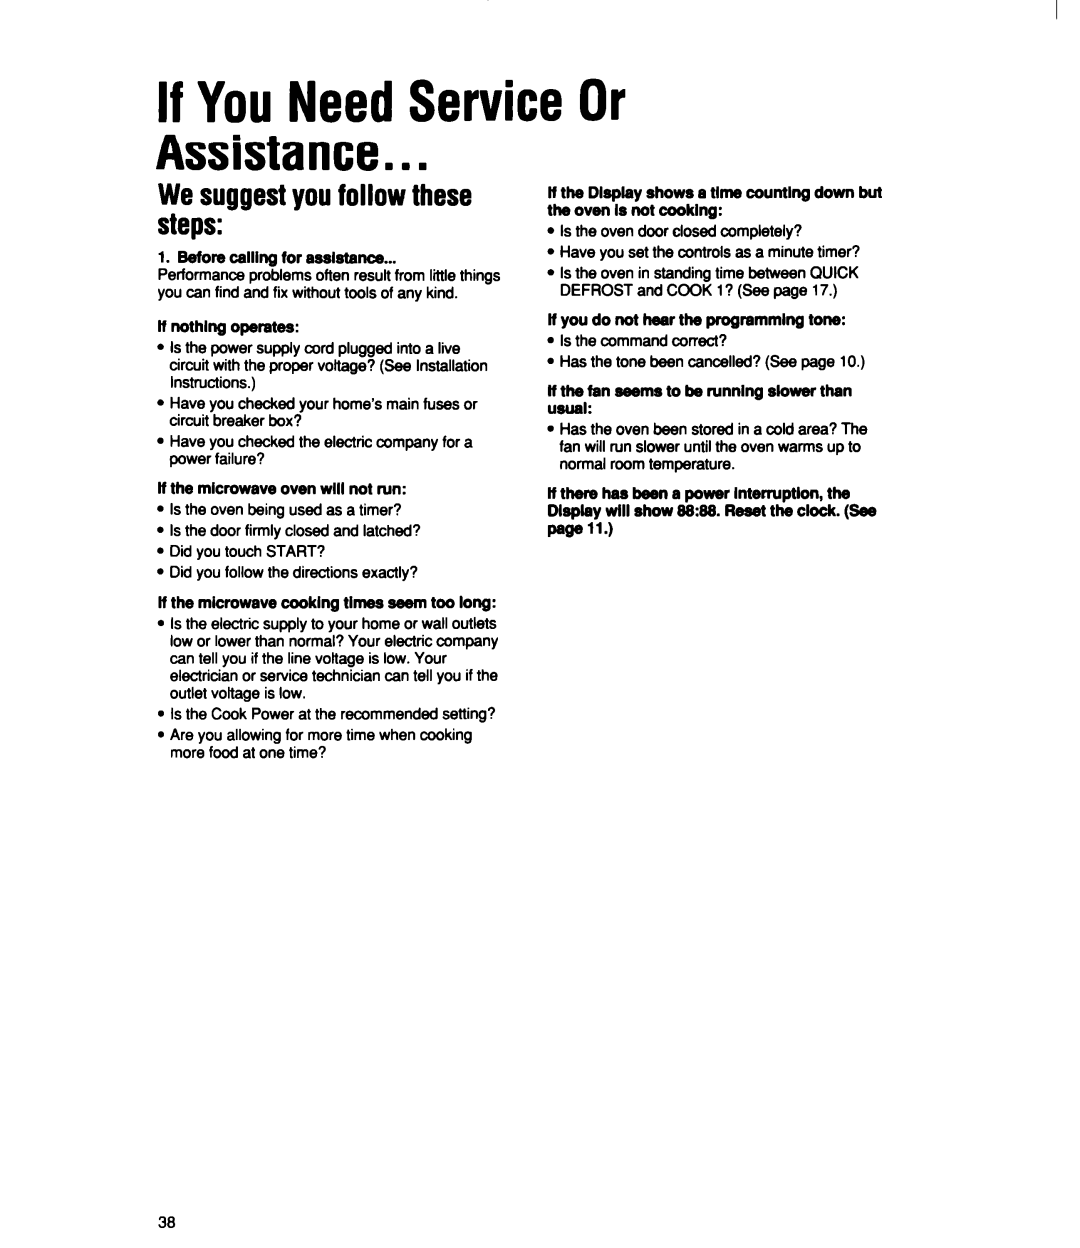 Whirlpool MT2100XY user manual If You Need Service Or, Assistance. 8n, Wesuggestyoufollow these steps 